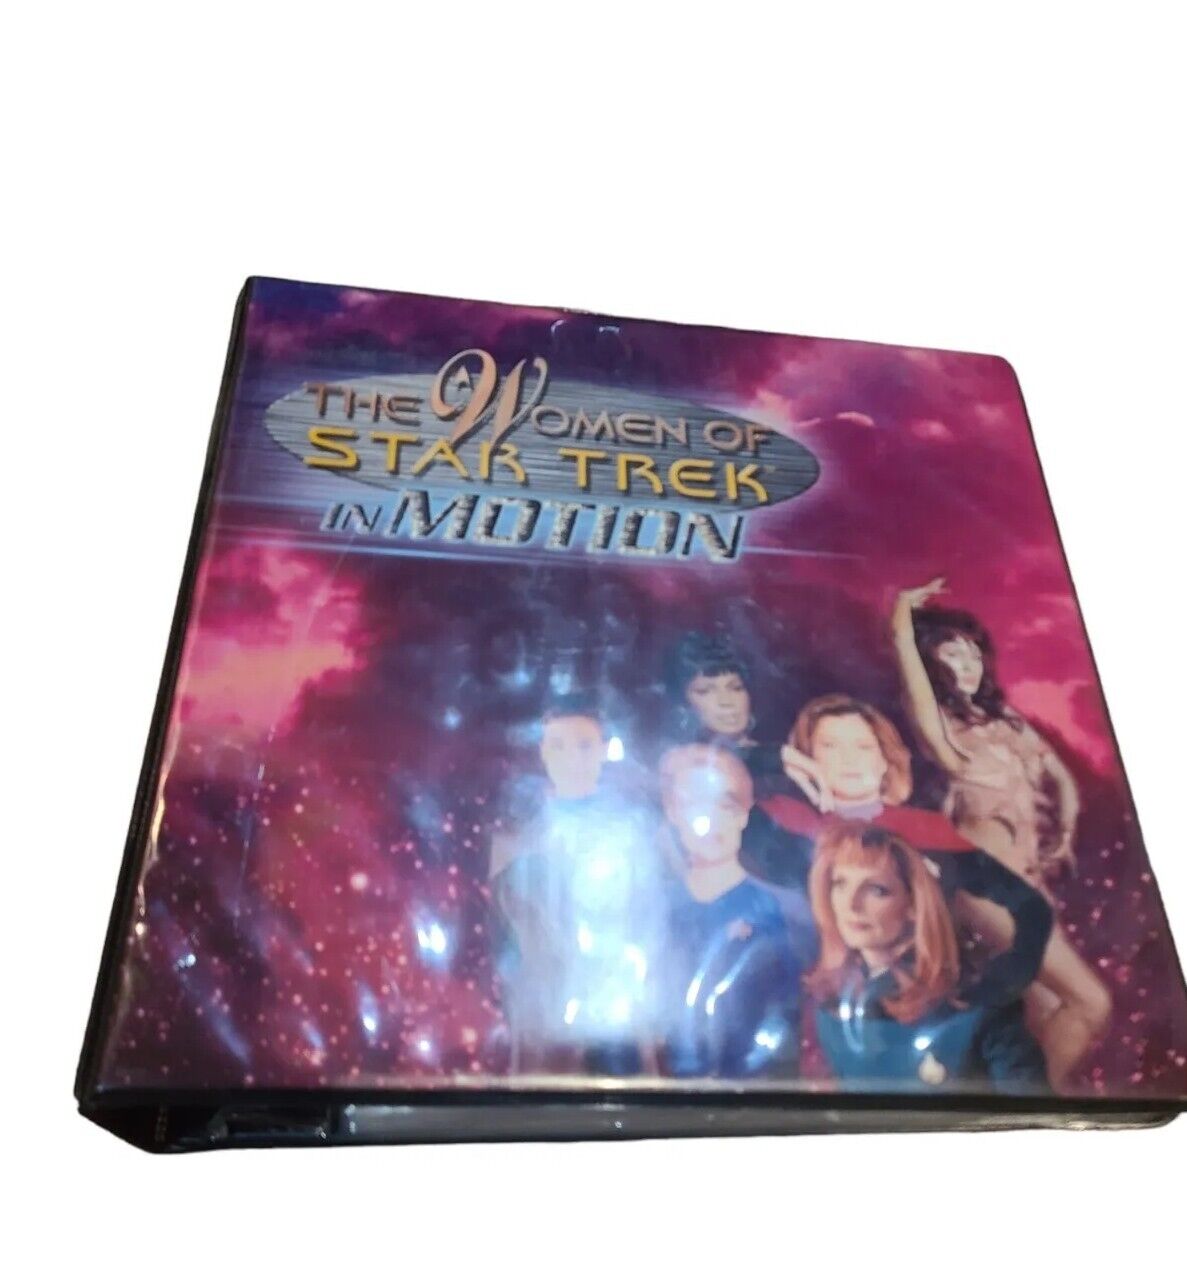 The Women of Star Trek 32 Card Set in Binder with Extra Lenticular Promo Cards